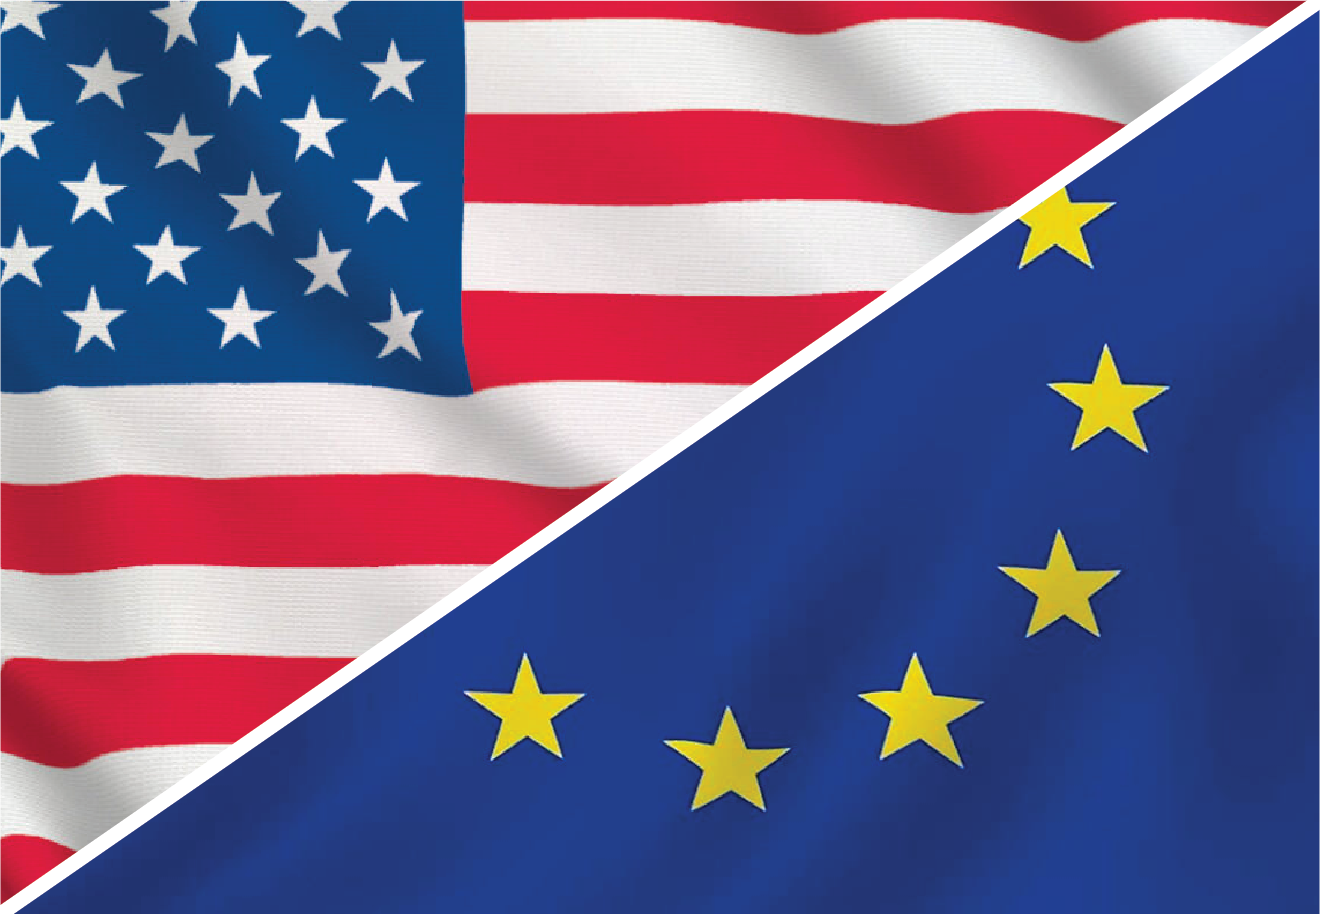 Image of an American and EU flags.